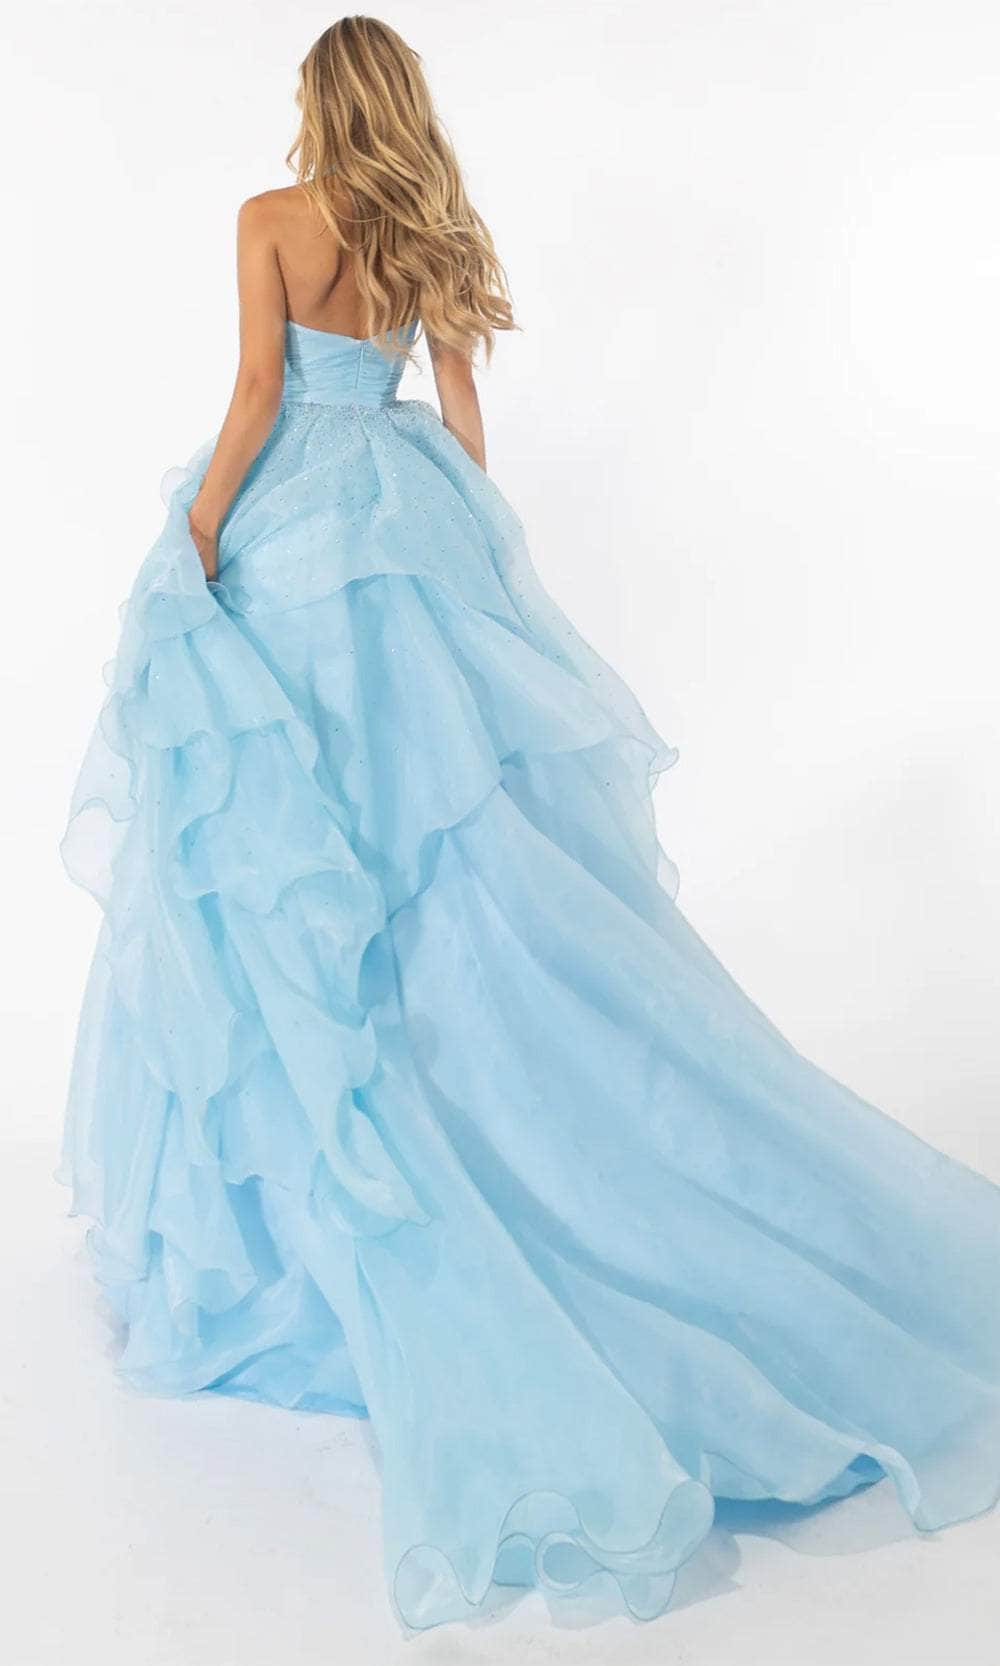 Ava Presley 39560 - Ruffled A-Line Prom Gown Prom Dresses